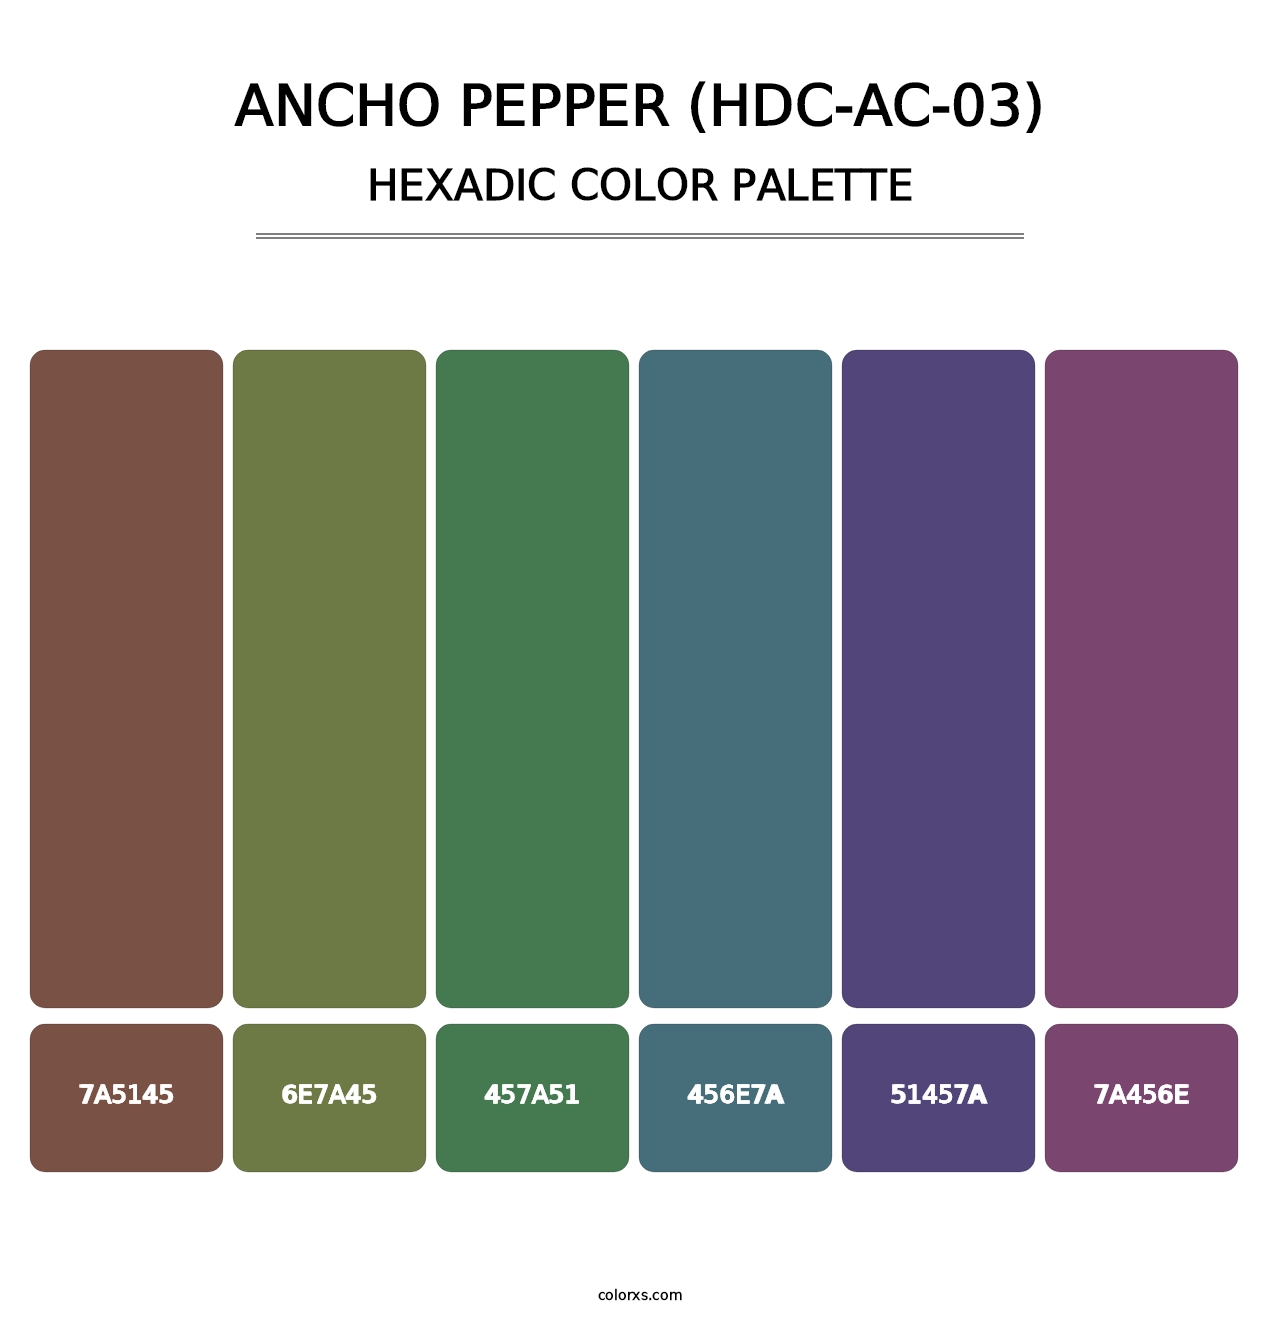 Ancho Pepper (HDC-AC-03) - Hexadic Color Palette